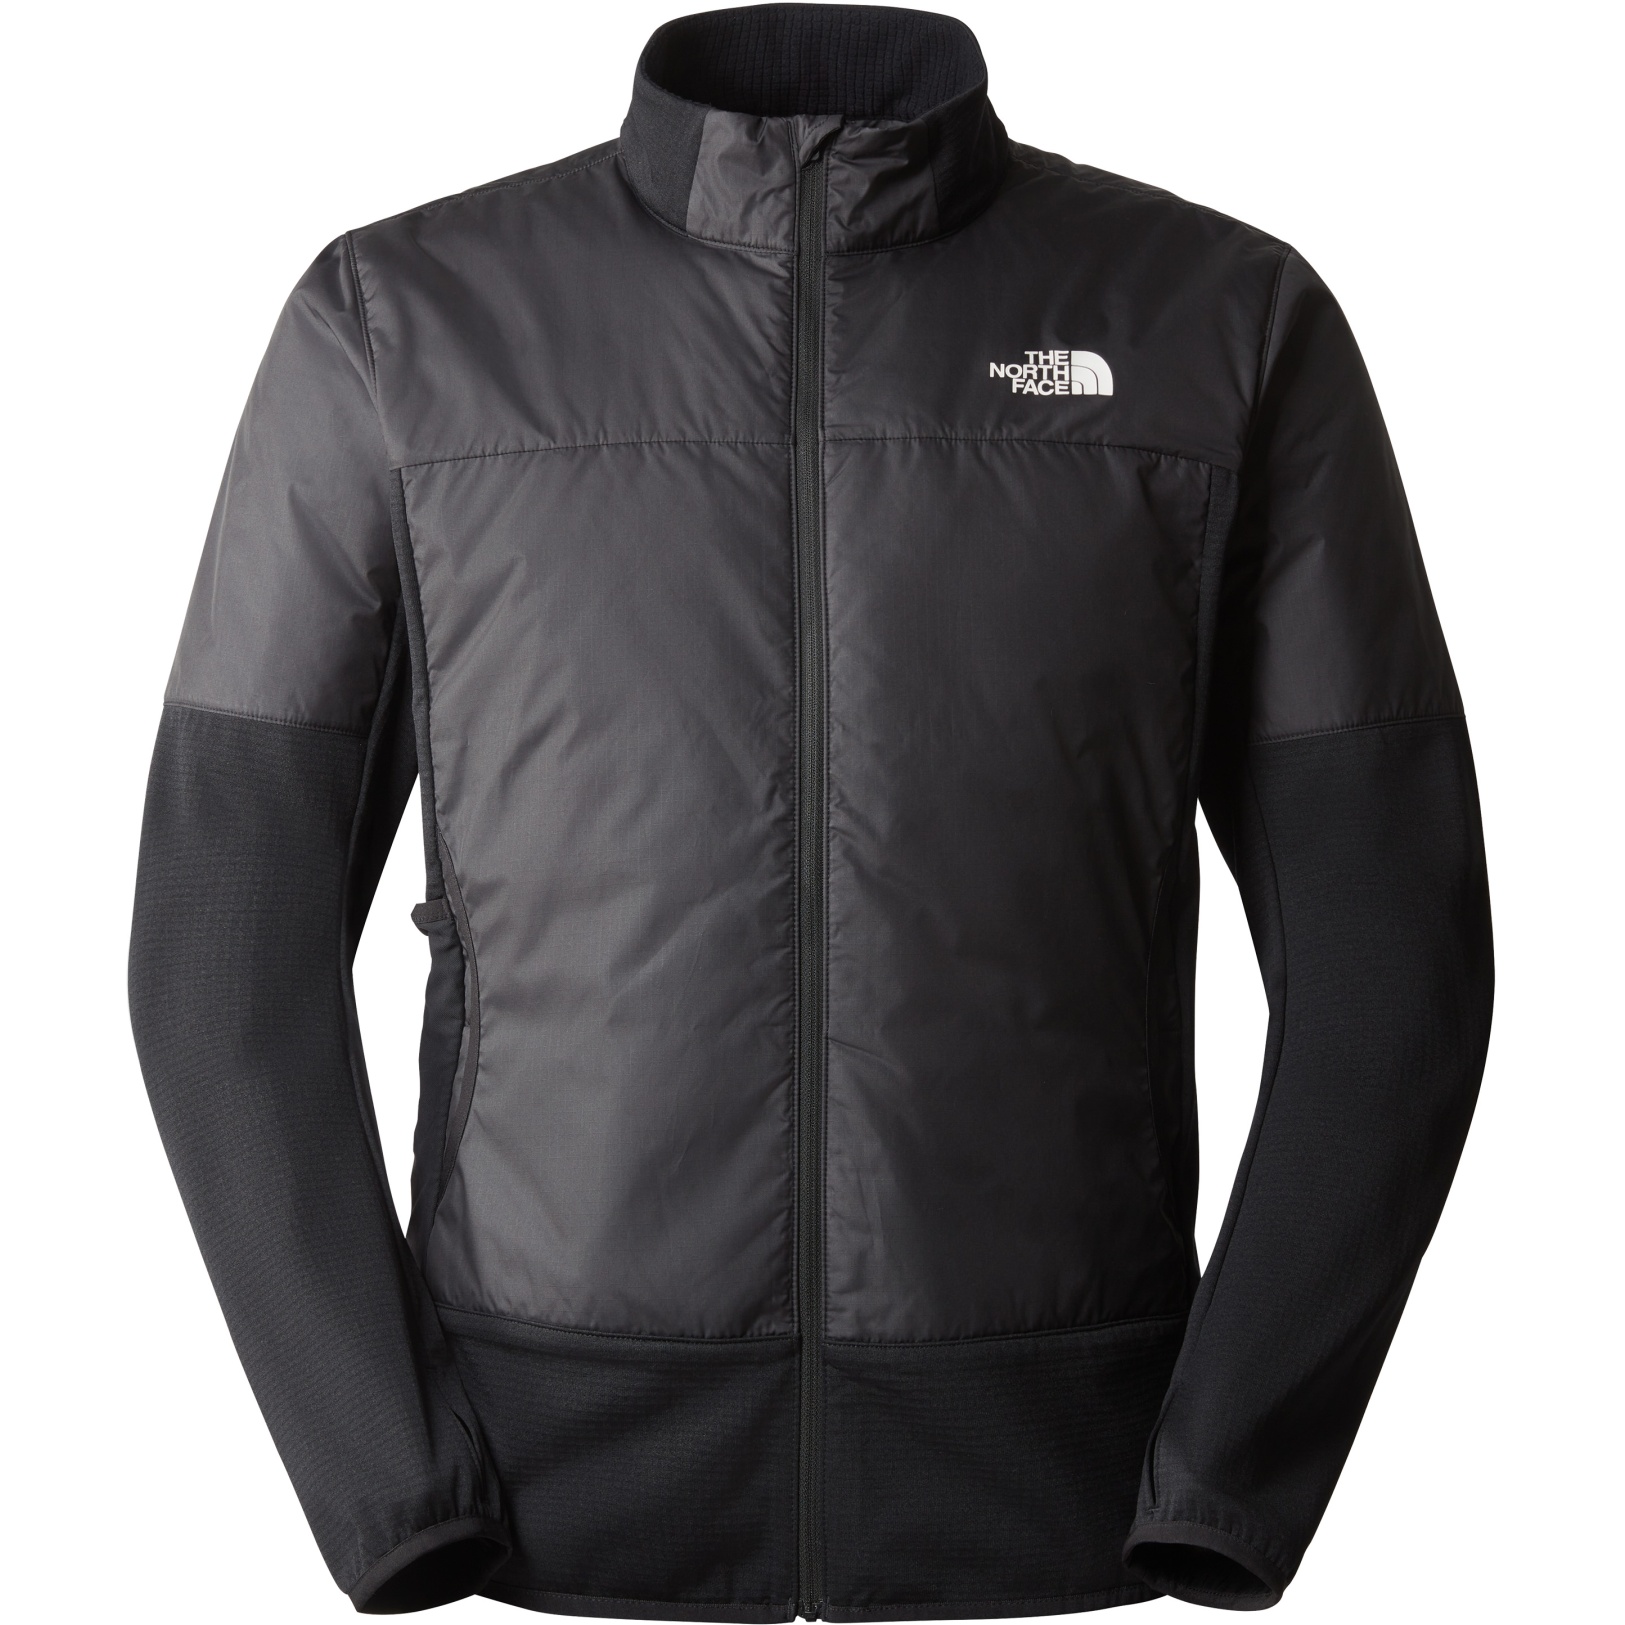 Buy The North Face Men's Winter Warm Jacket, Tnf Black, X-Large at